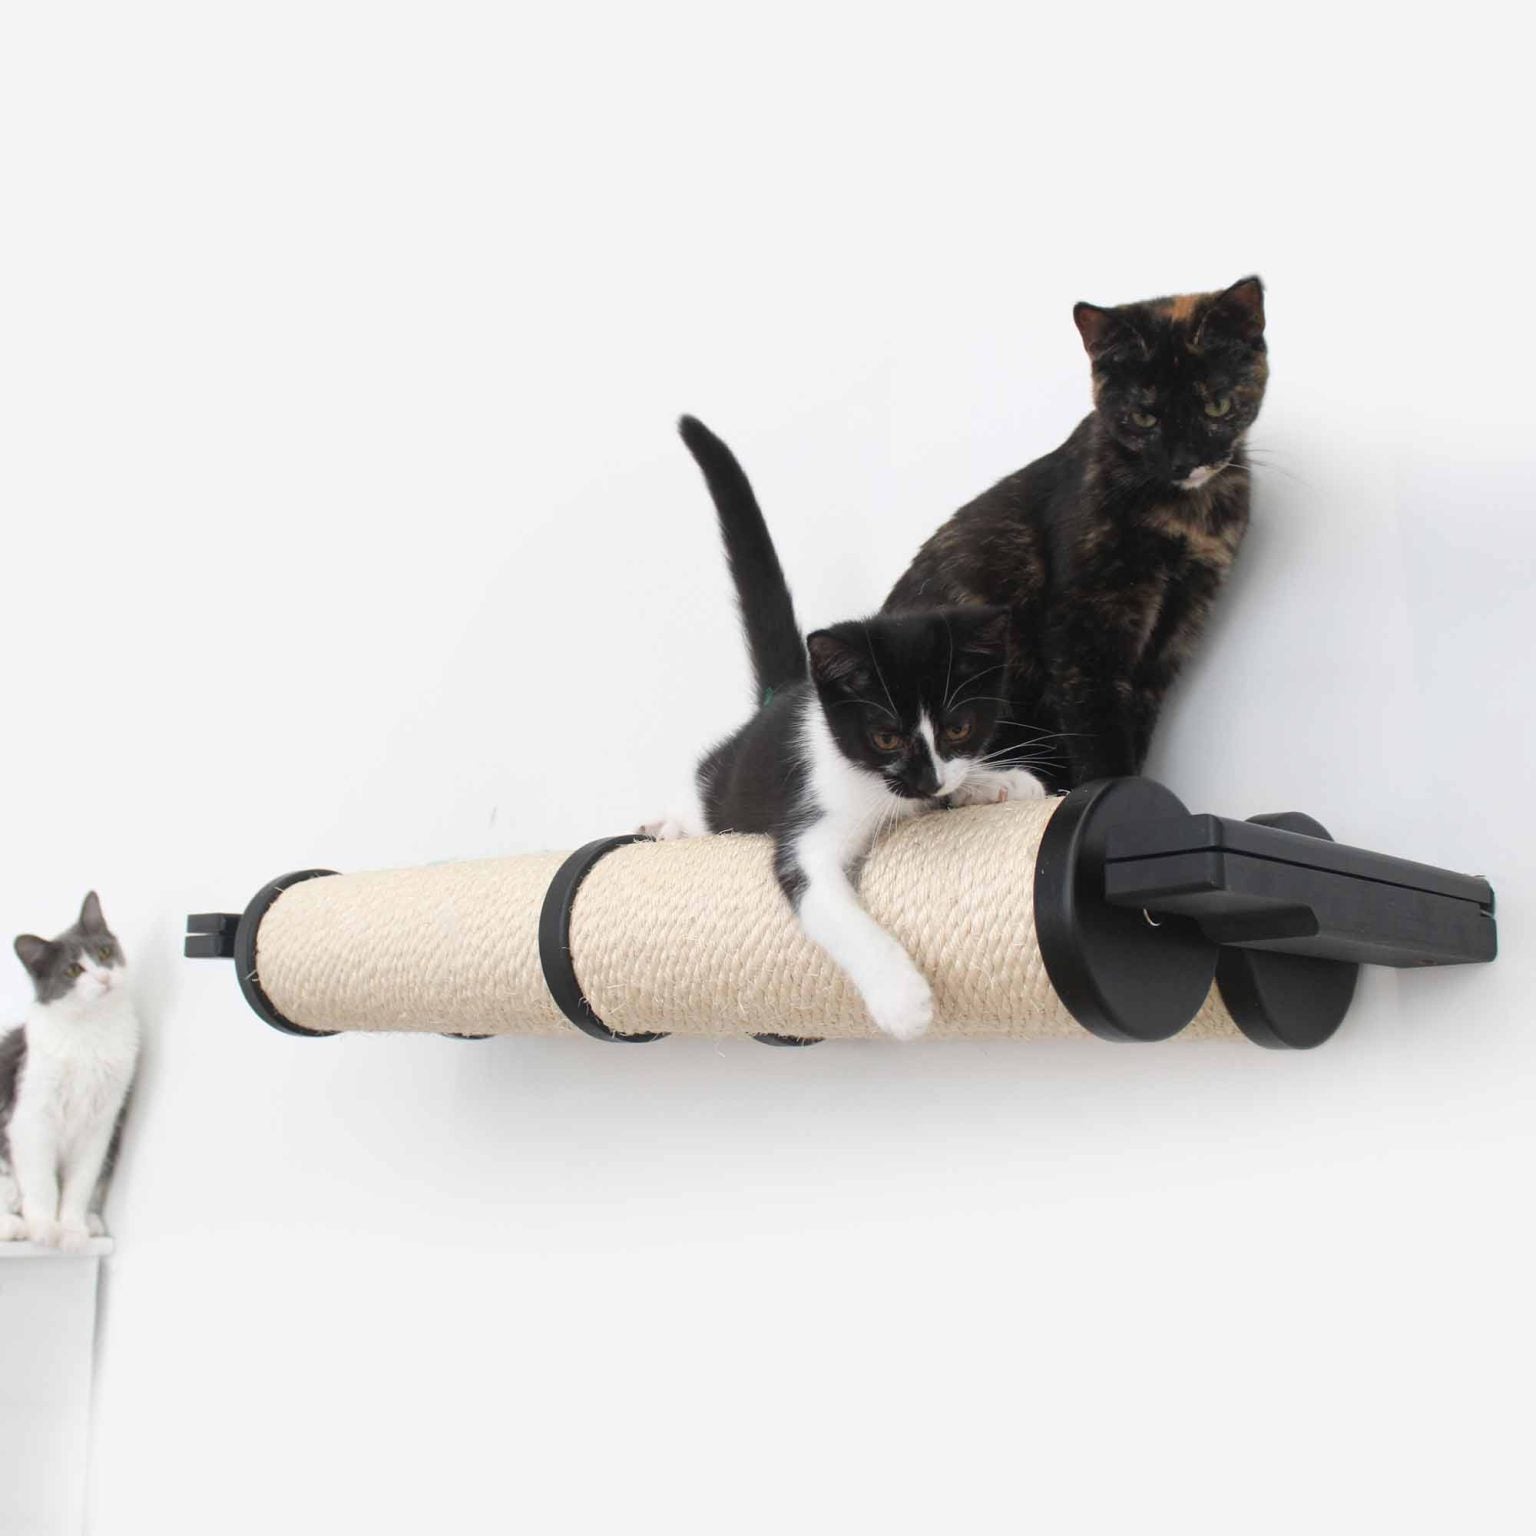 Two kittens play on a Double Horizontal Pole while a third watches.